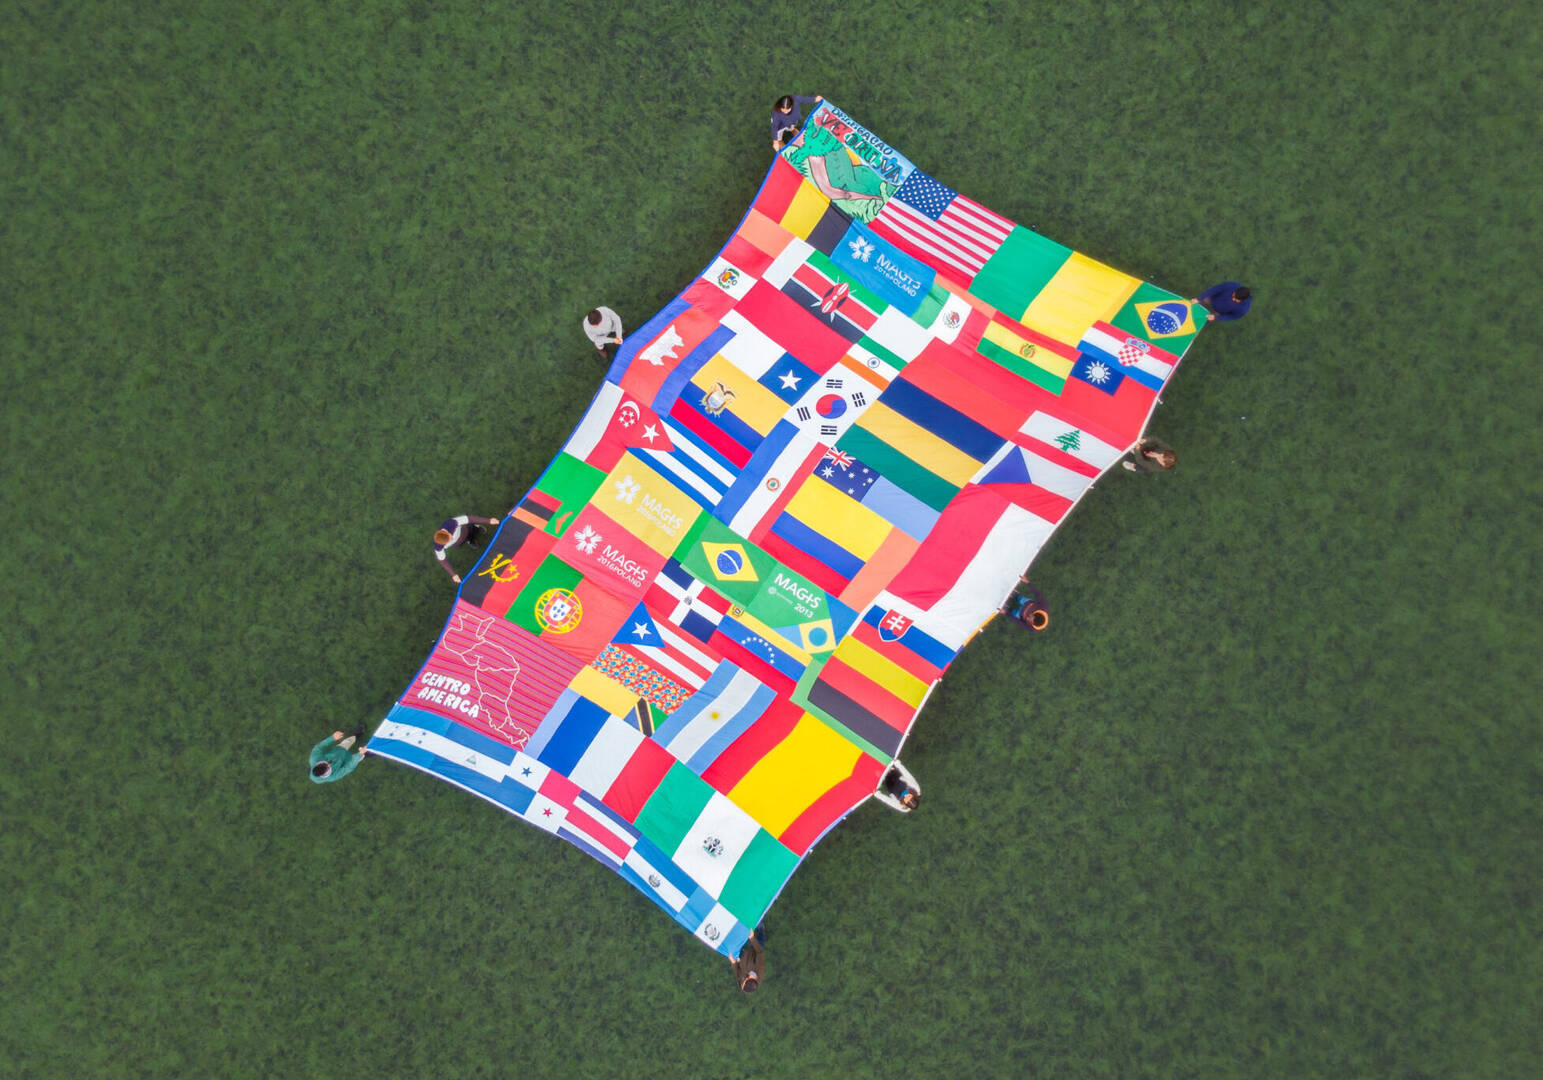 A quilt featuring some of the MAGIS logos over the years, and the flags of all the countries who have participated in MAGIS since it first started in 2005. Photo credit: MAGIS 2023